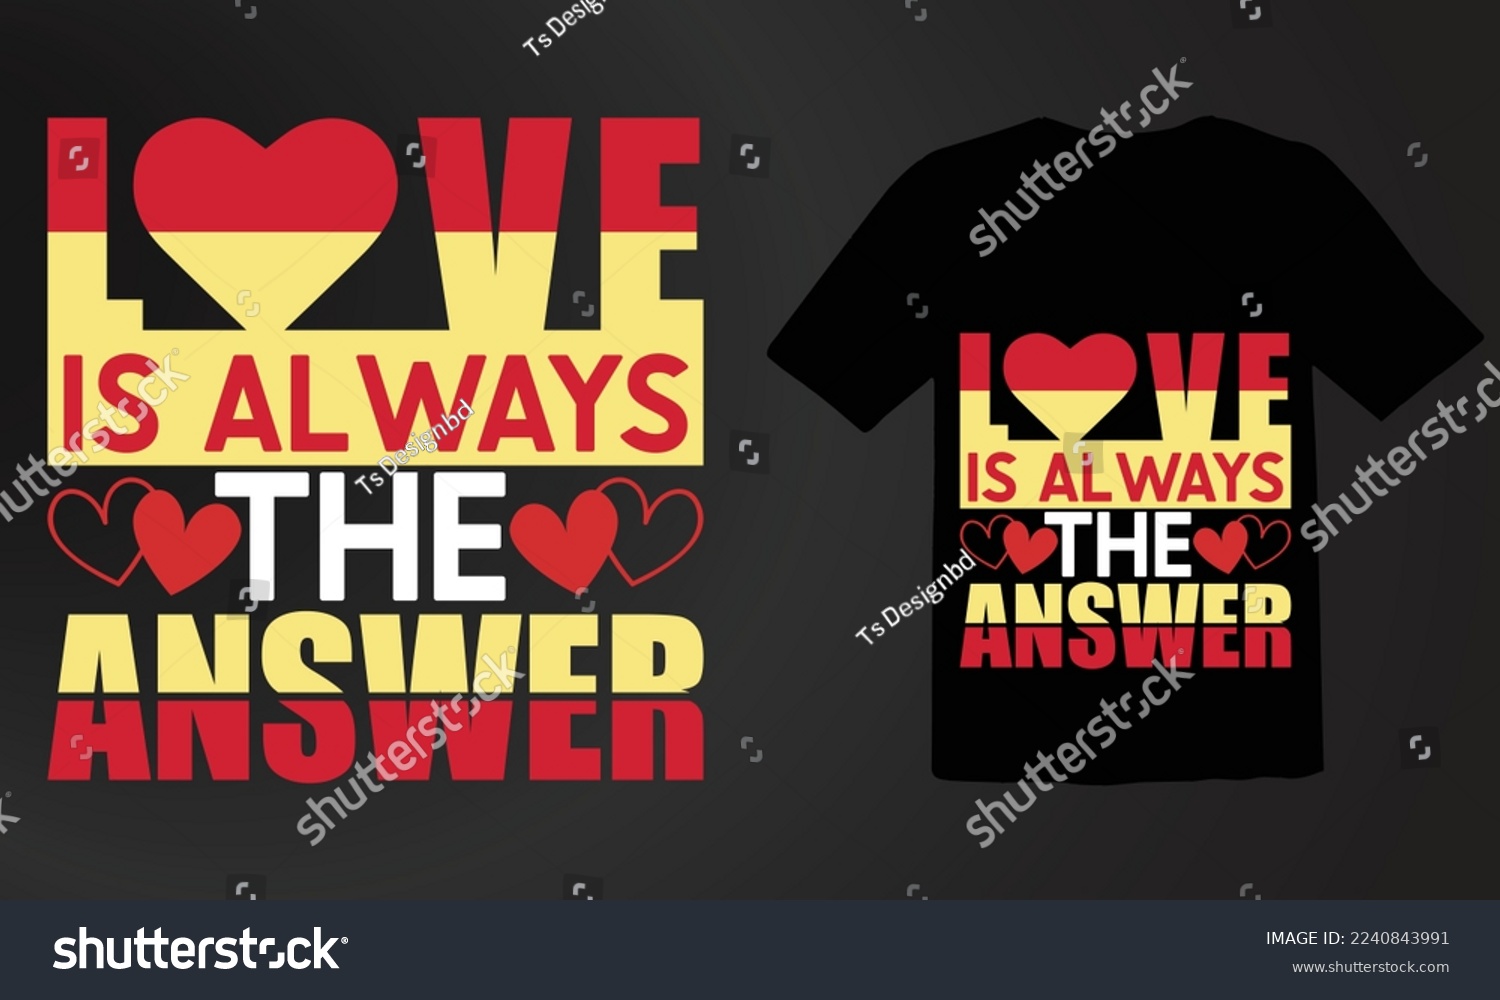 SVG of love is always the answer T shirt Design,Love awesome t shirt designs. Custom t-shirt design. Funny t shirt design. svg